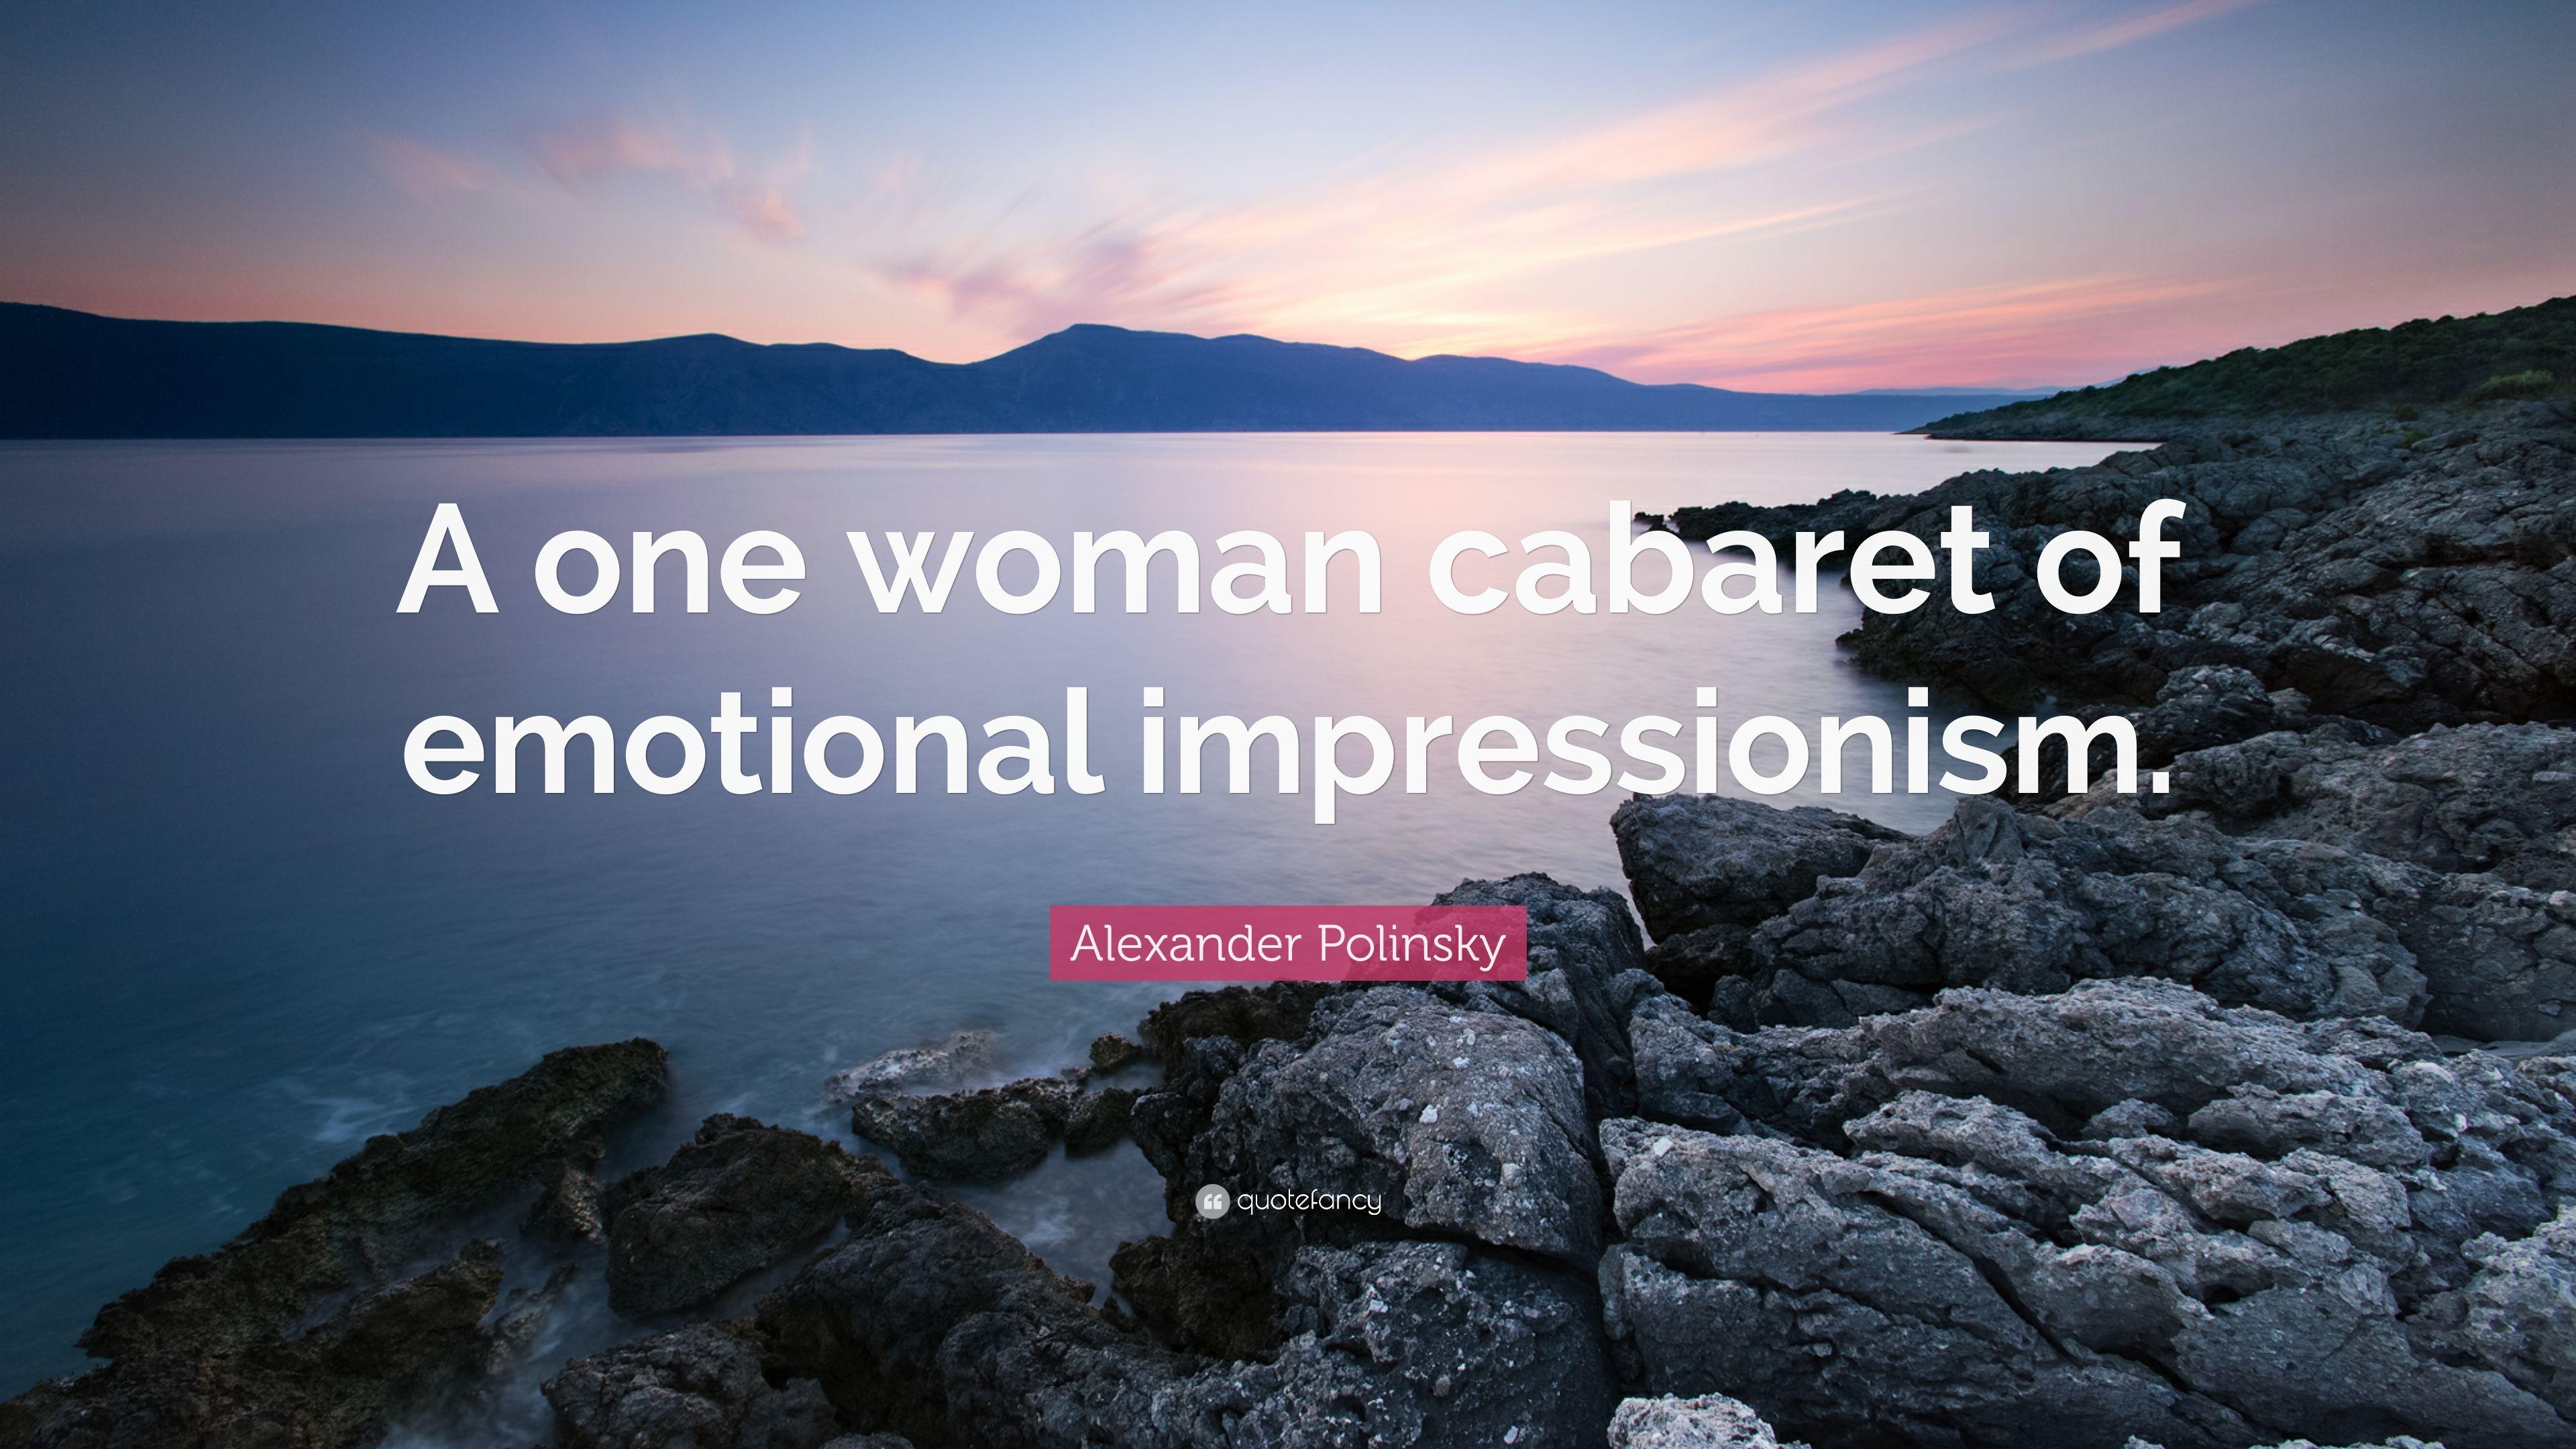 Alexander Polinsky Quote: “A one woman cabaret of emotional